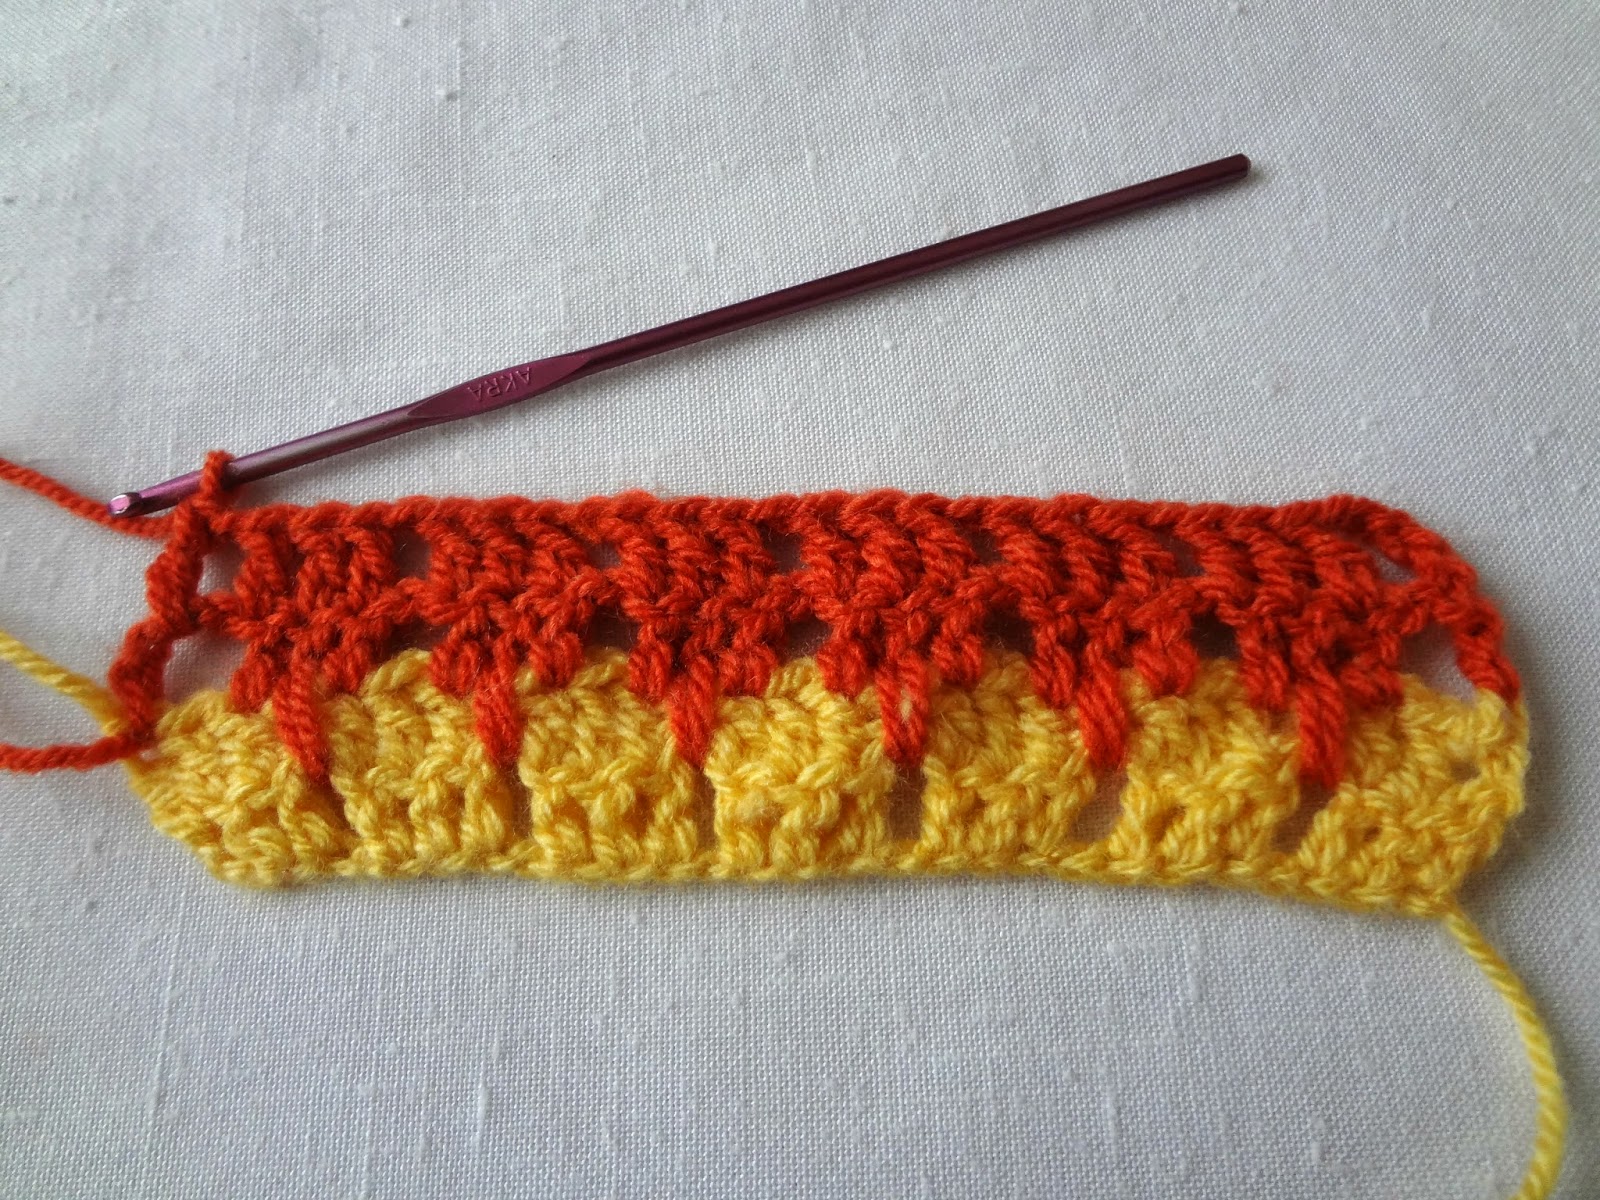 Little Treasures: Larksfoot Crochet Stitch Pattern (or the Icicle